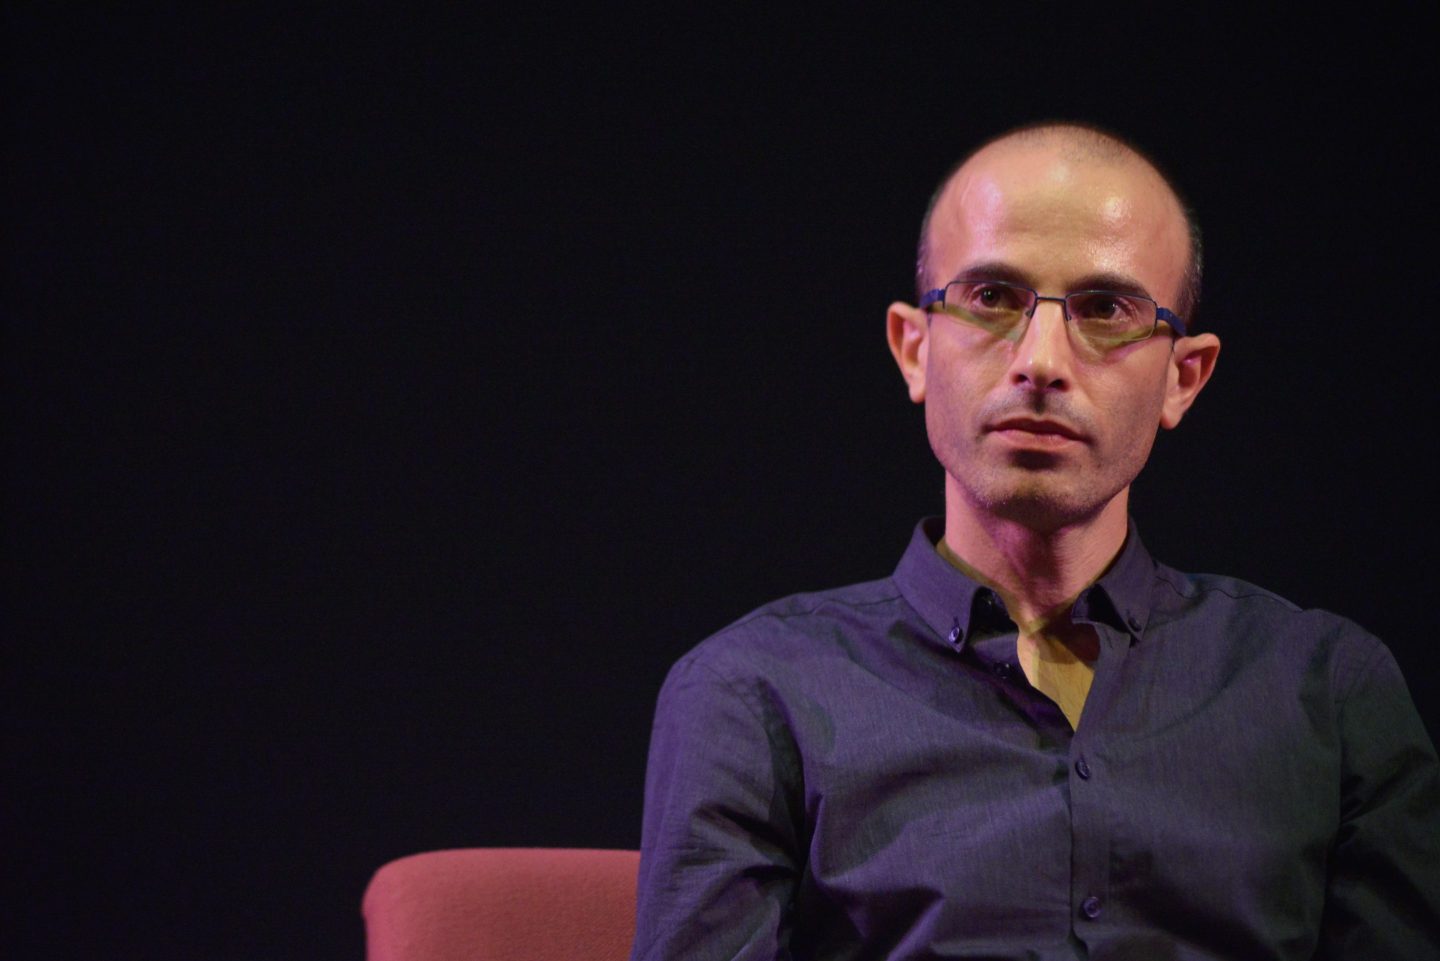 Professor Yuval Noah Harari, author and Professor of History at the Hebrew University of Jerusalem, speaks about themes from his new book 'Homo Deus: A Brief History of Tomorrow' on September 8, 2016 at the Dancehouse Theatre as part of the Manchester Literature Festival in Manchester, England. (Photo by Jonathan Nicholson/NurPhoto via Getty Images)